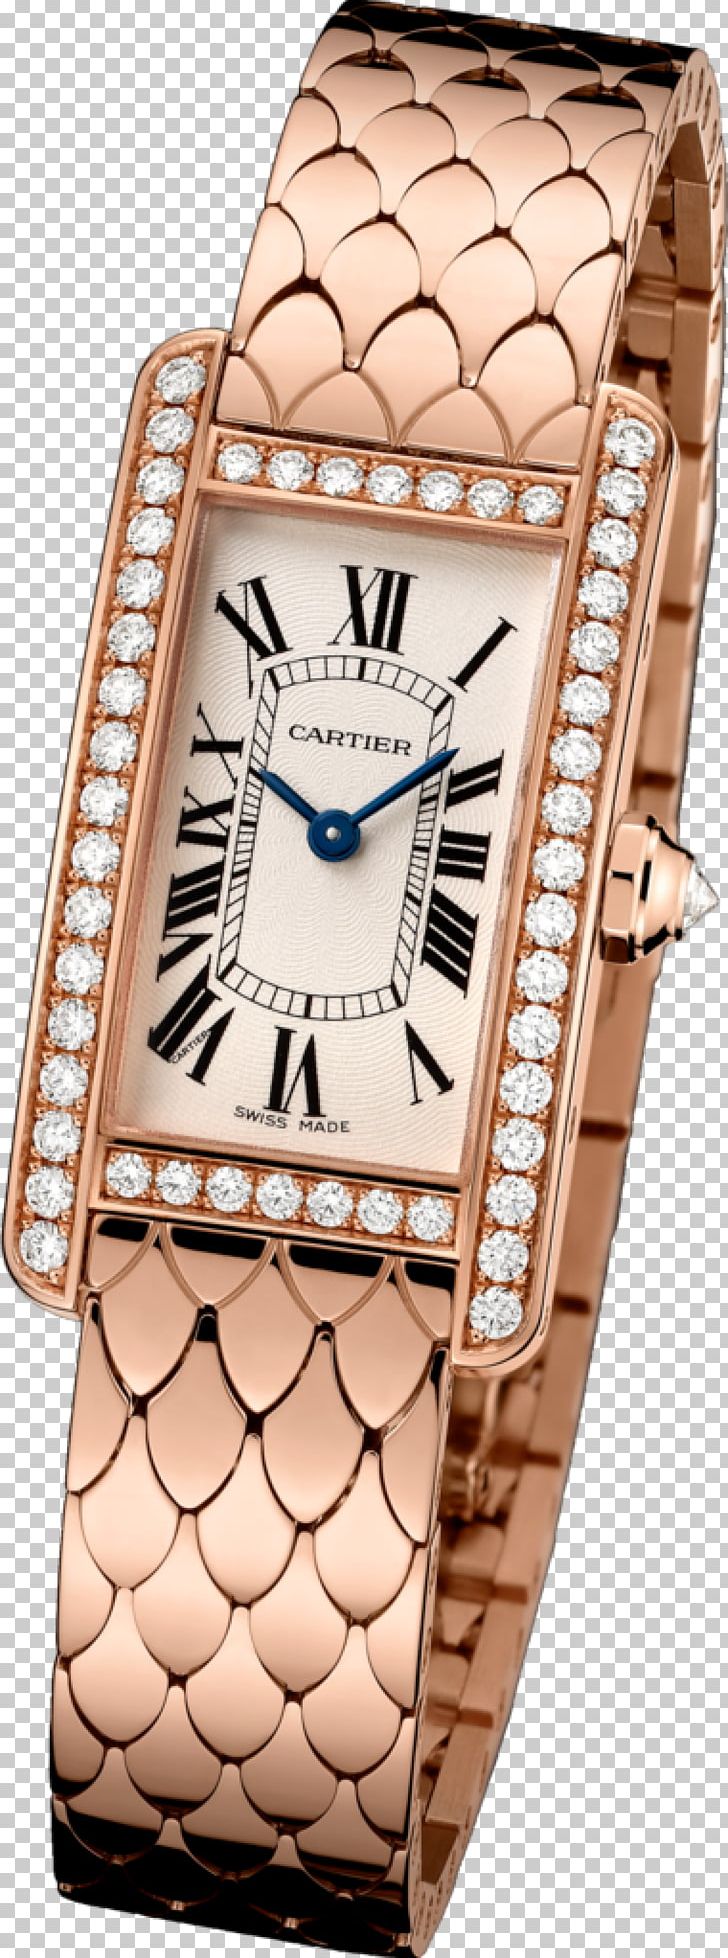 is cartier a fashion watch